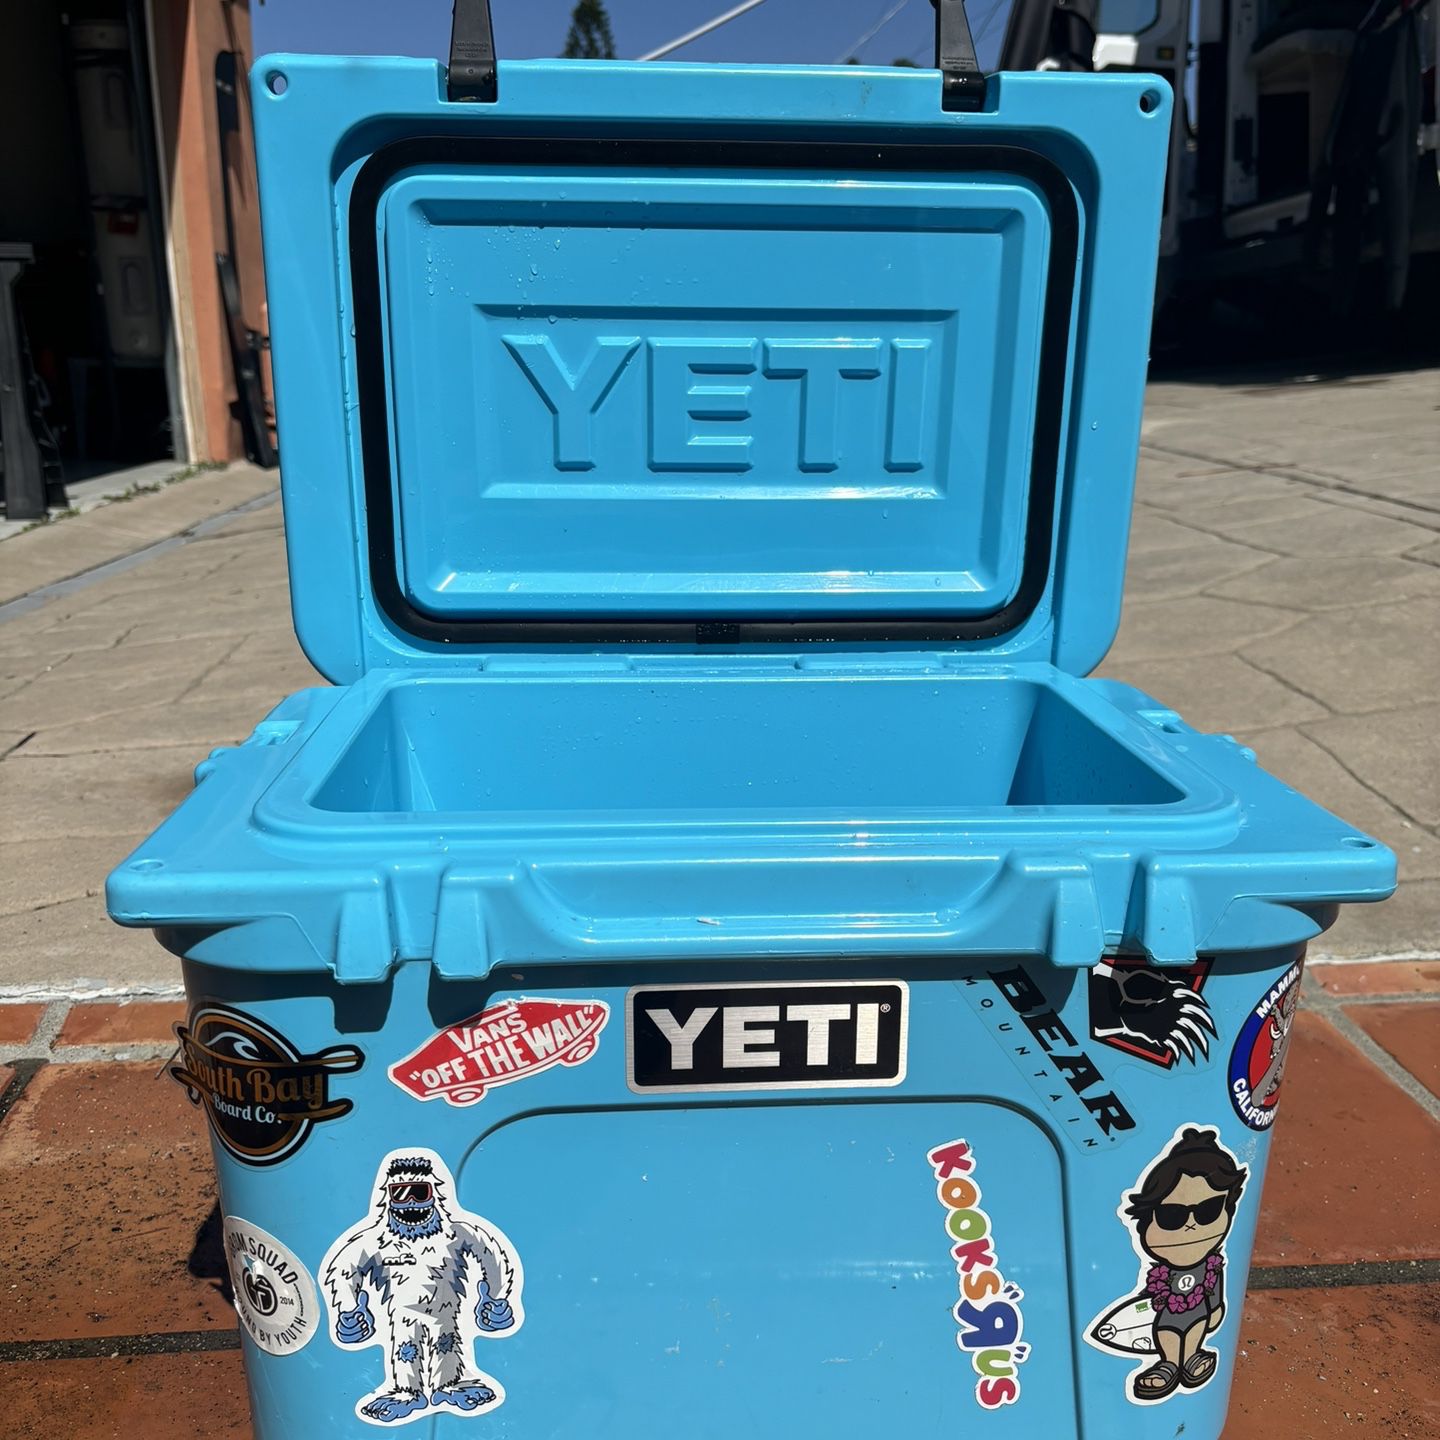 Yeti Roadie 20 Cooler REEF BLUE (Limitied Edition Color)